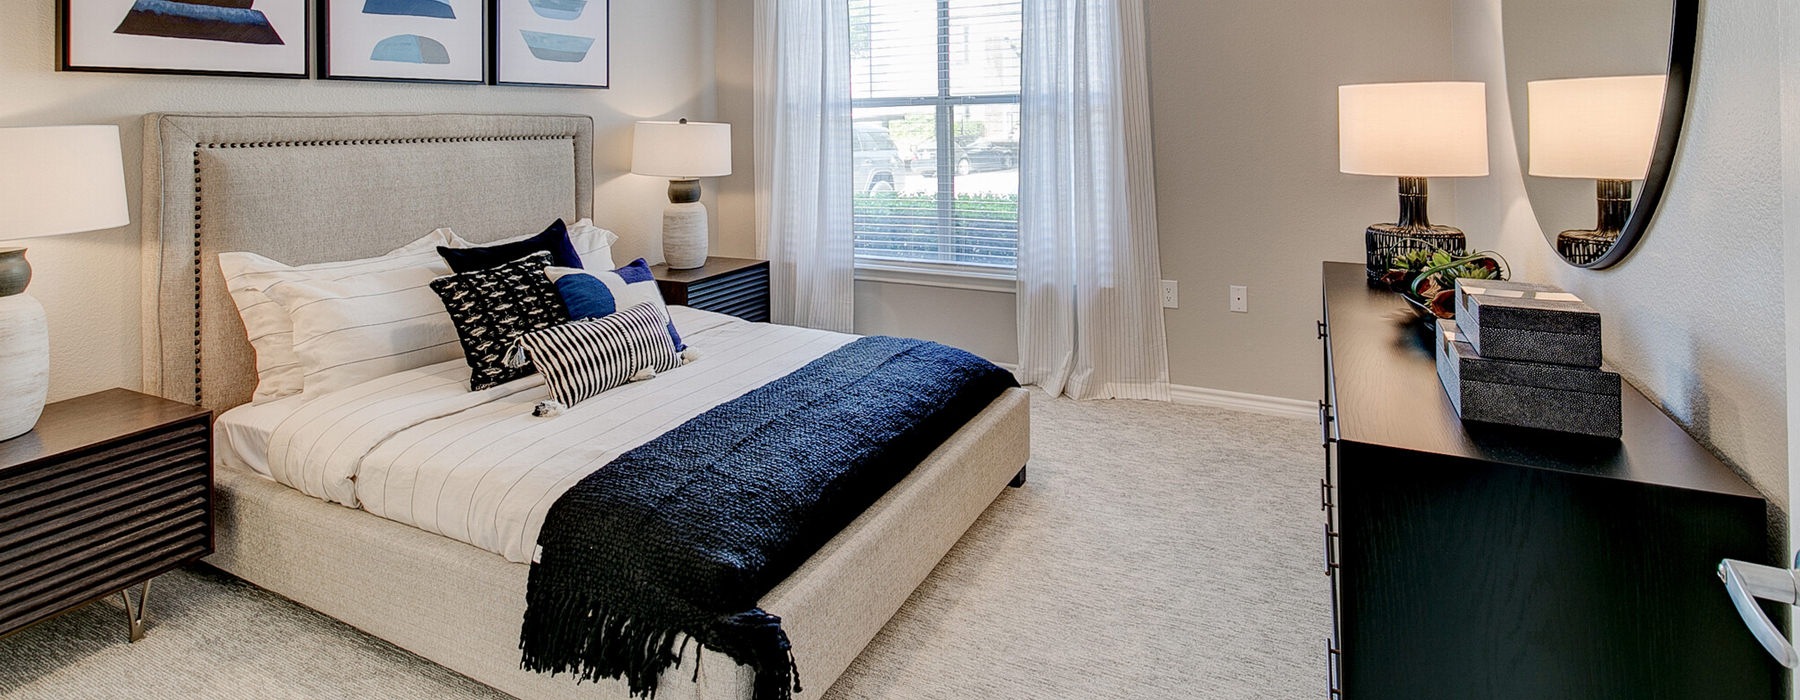 Bedroom with large bed, ensuite. queen bed and nightstands.